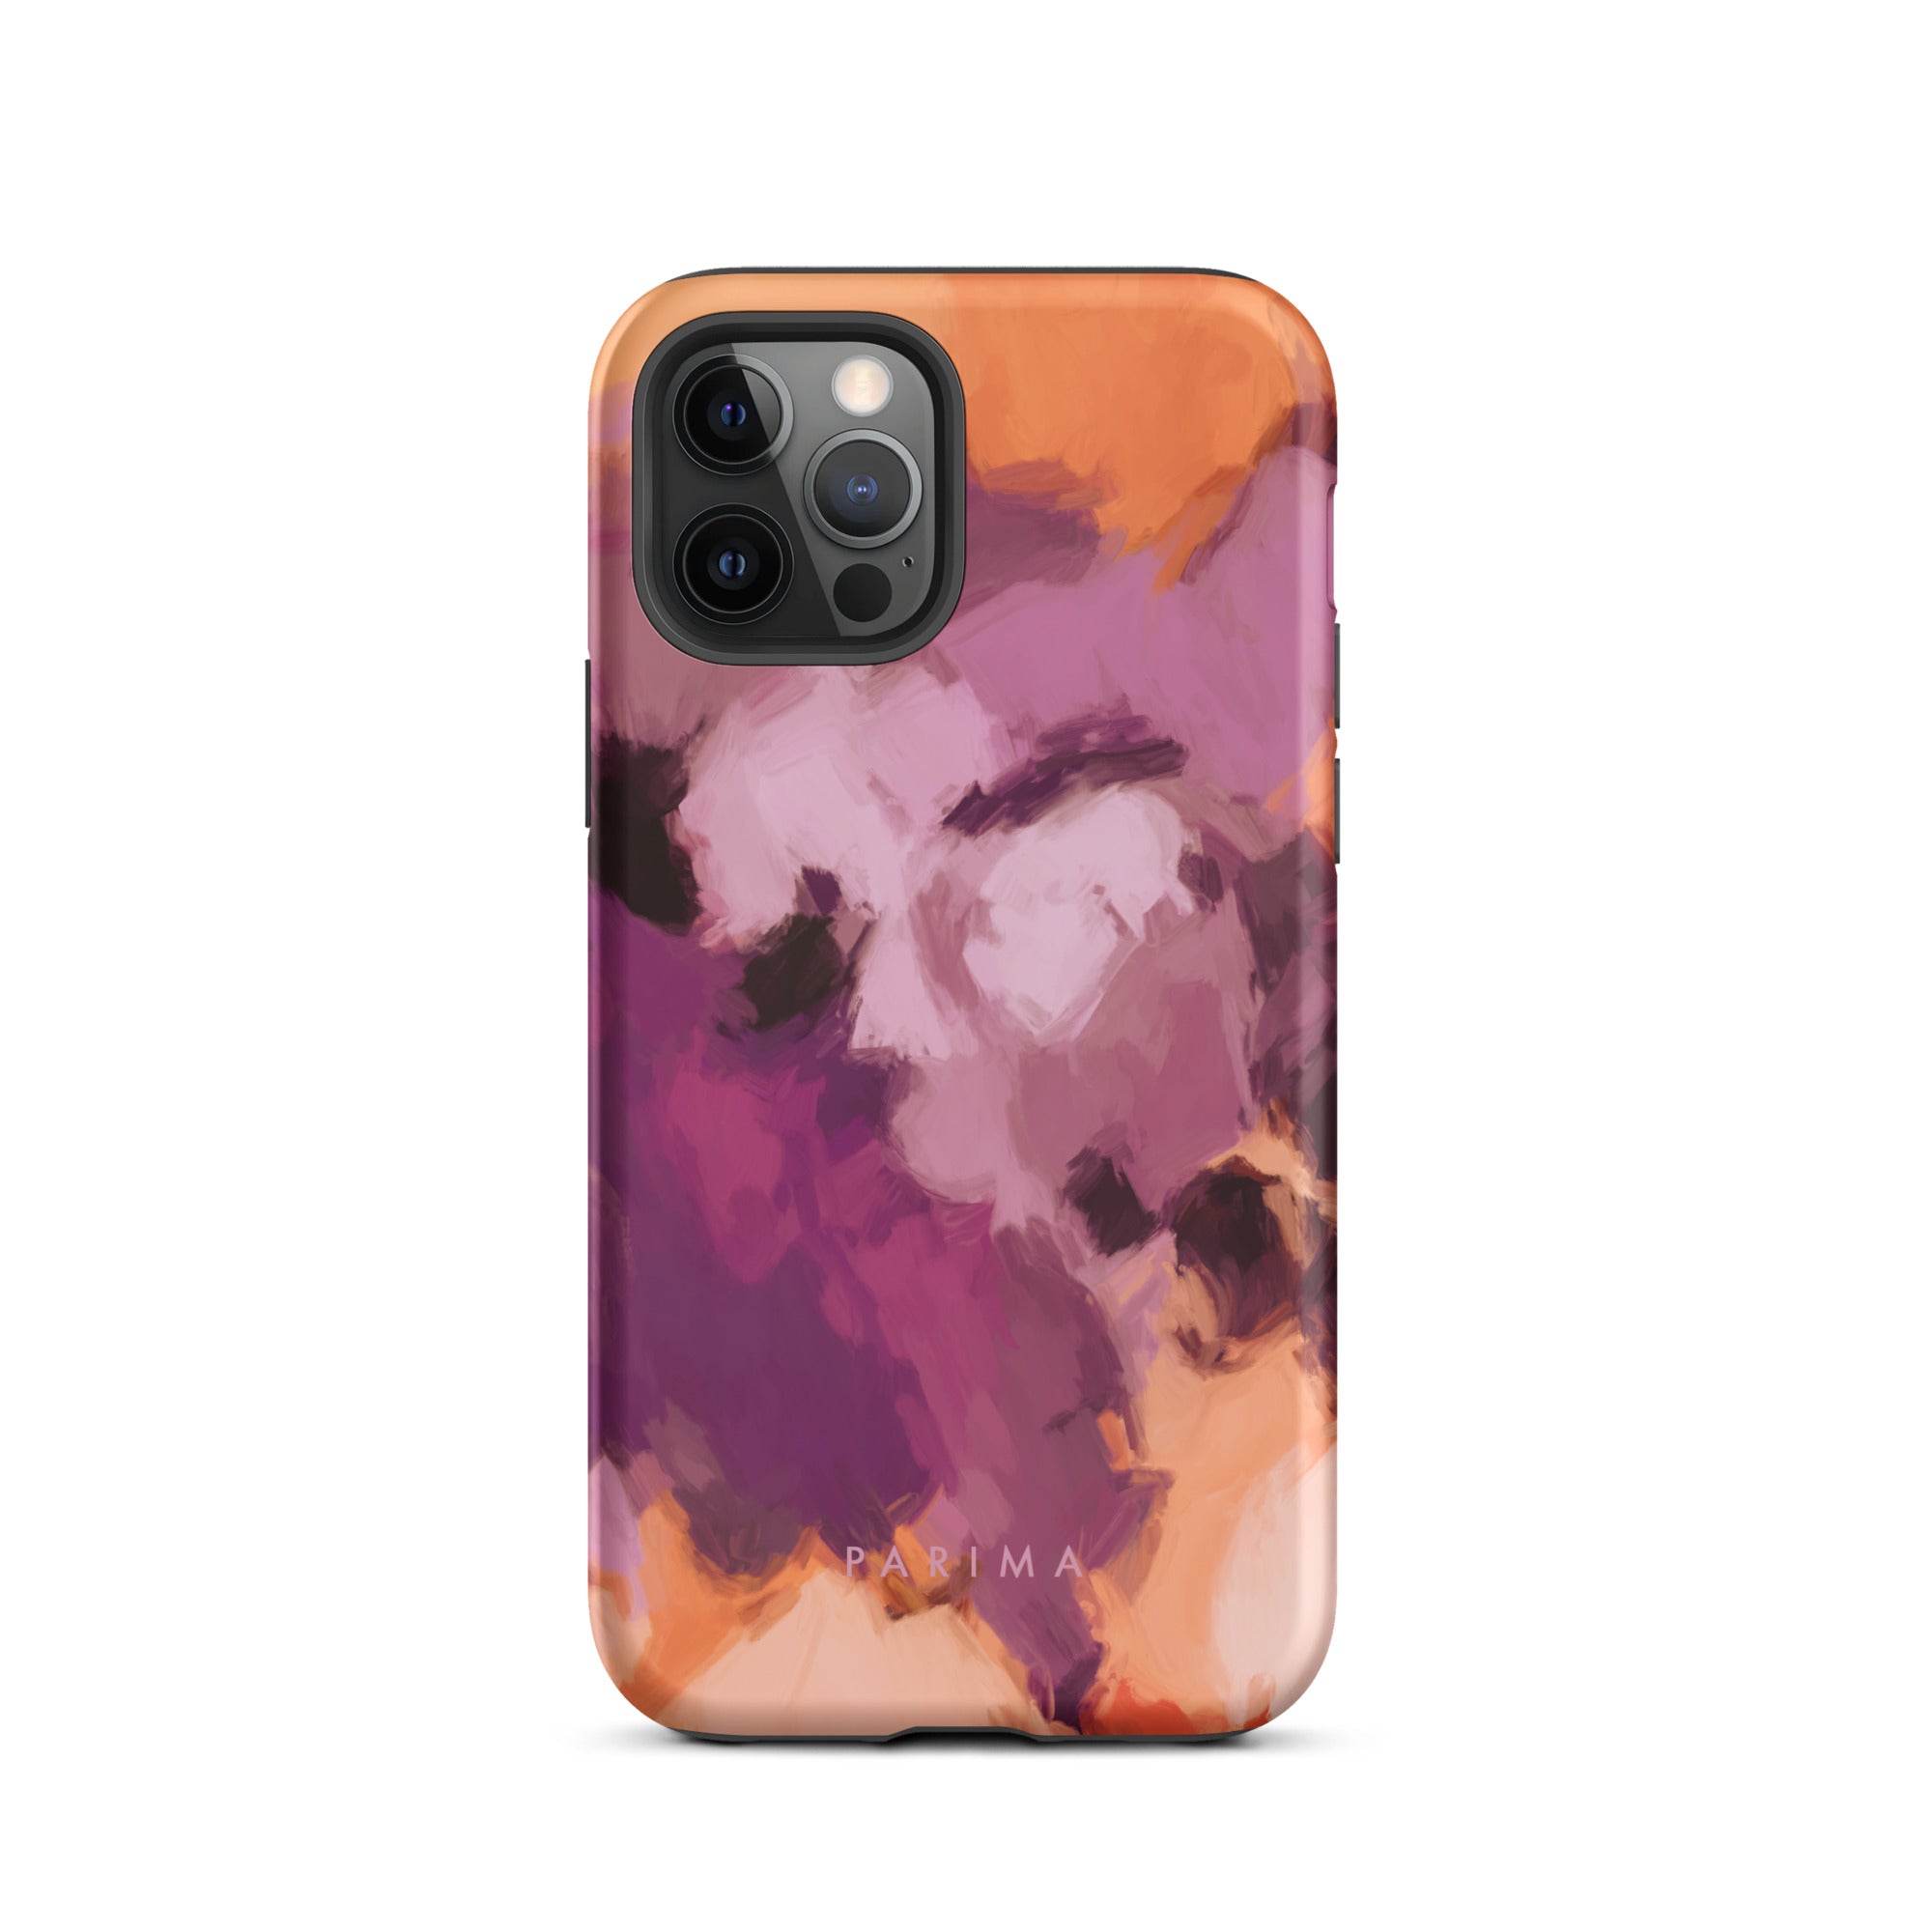 Lilac, purple and orange abstract art on iPhone 12 Pro tough case by Parima Studio